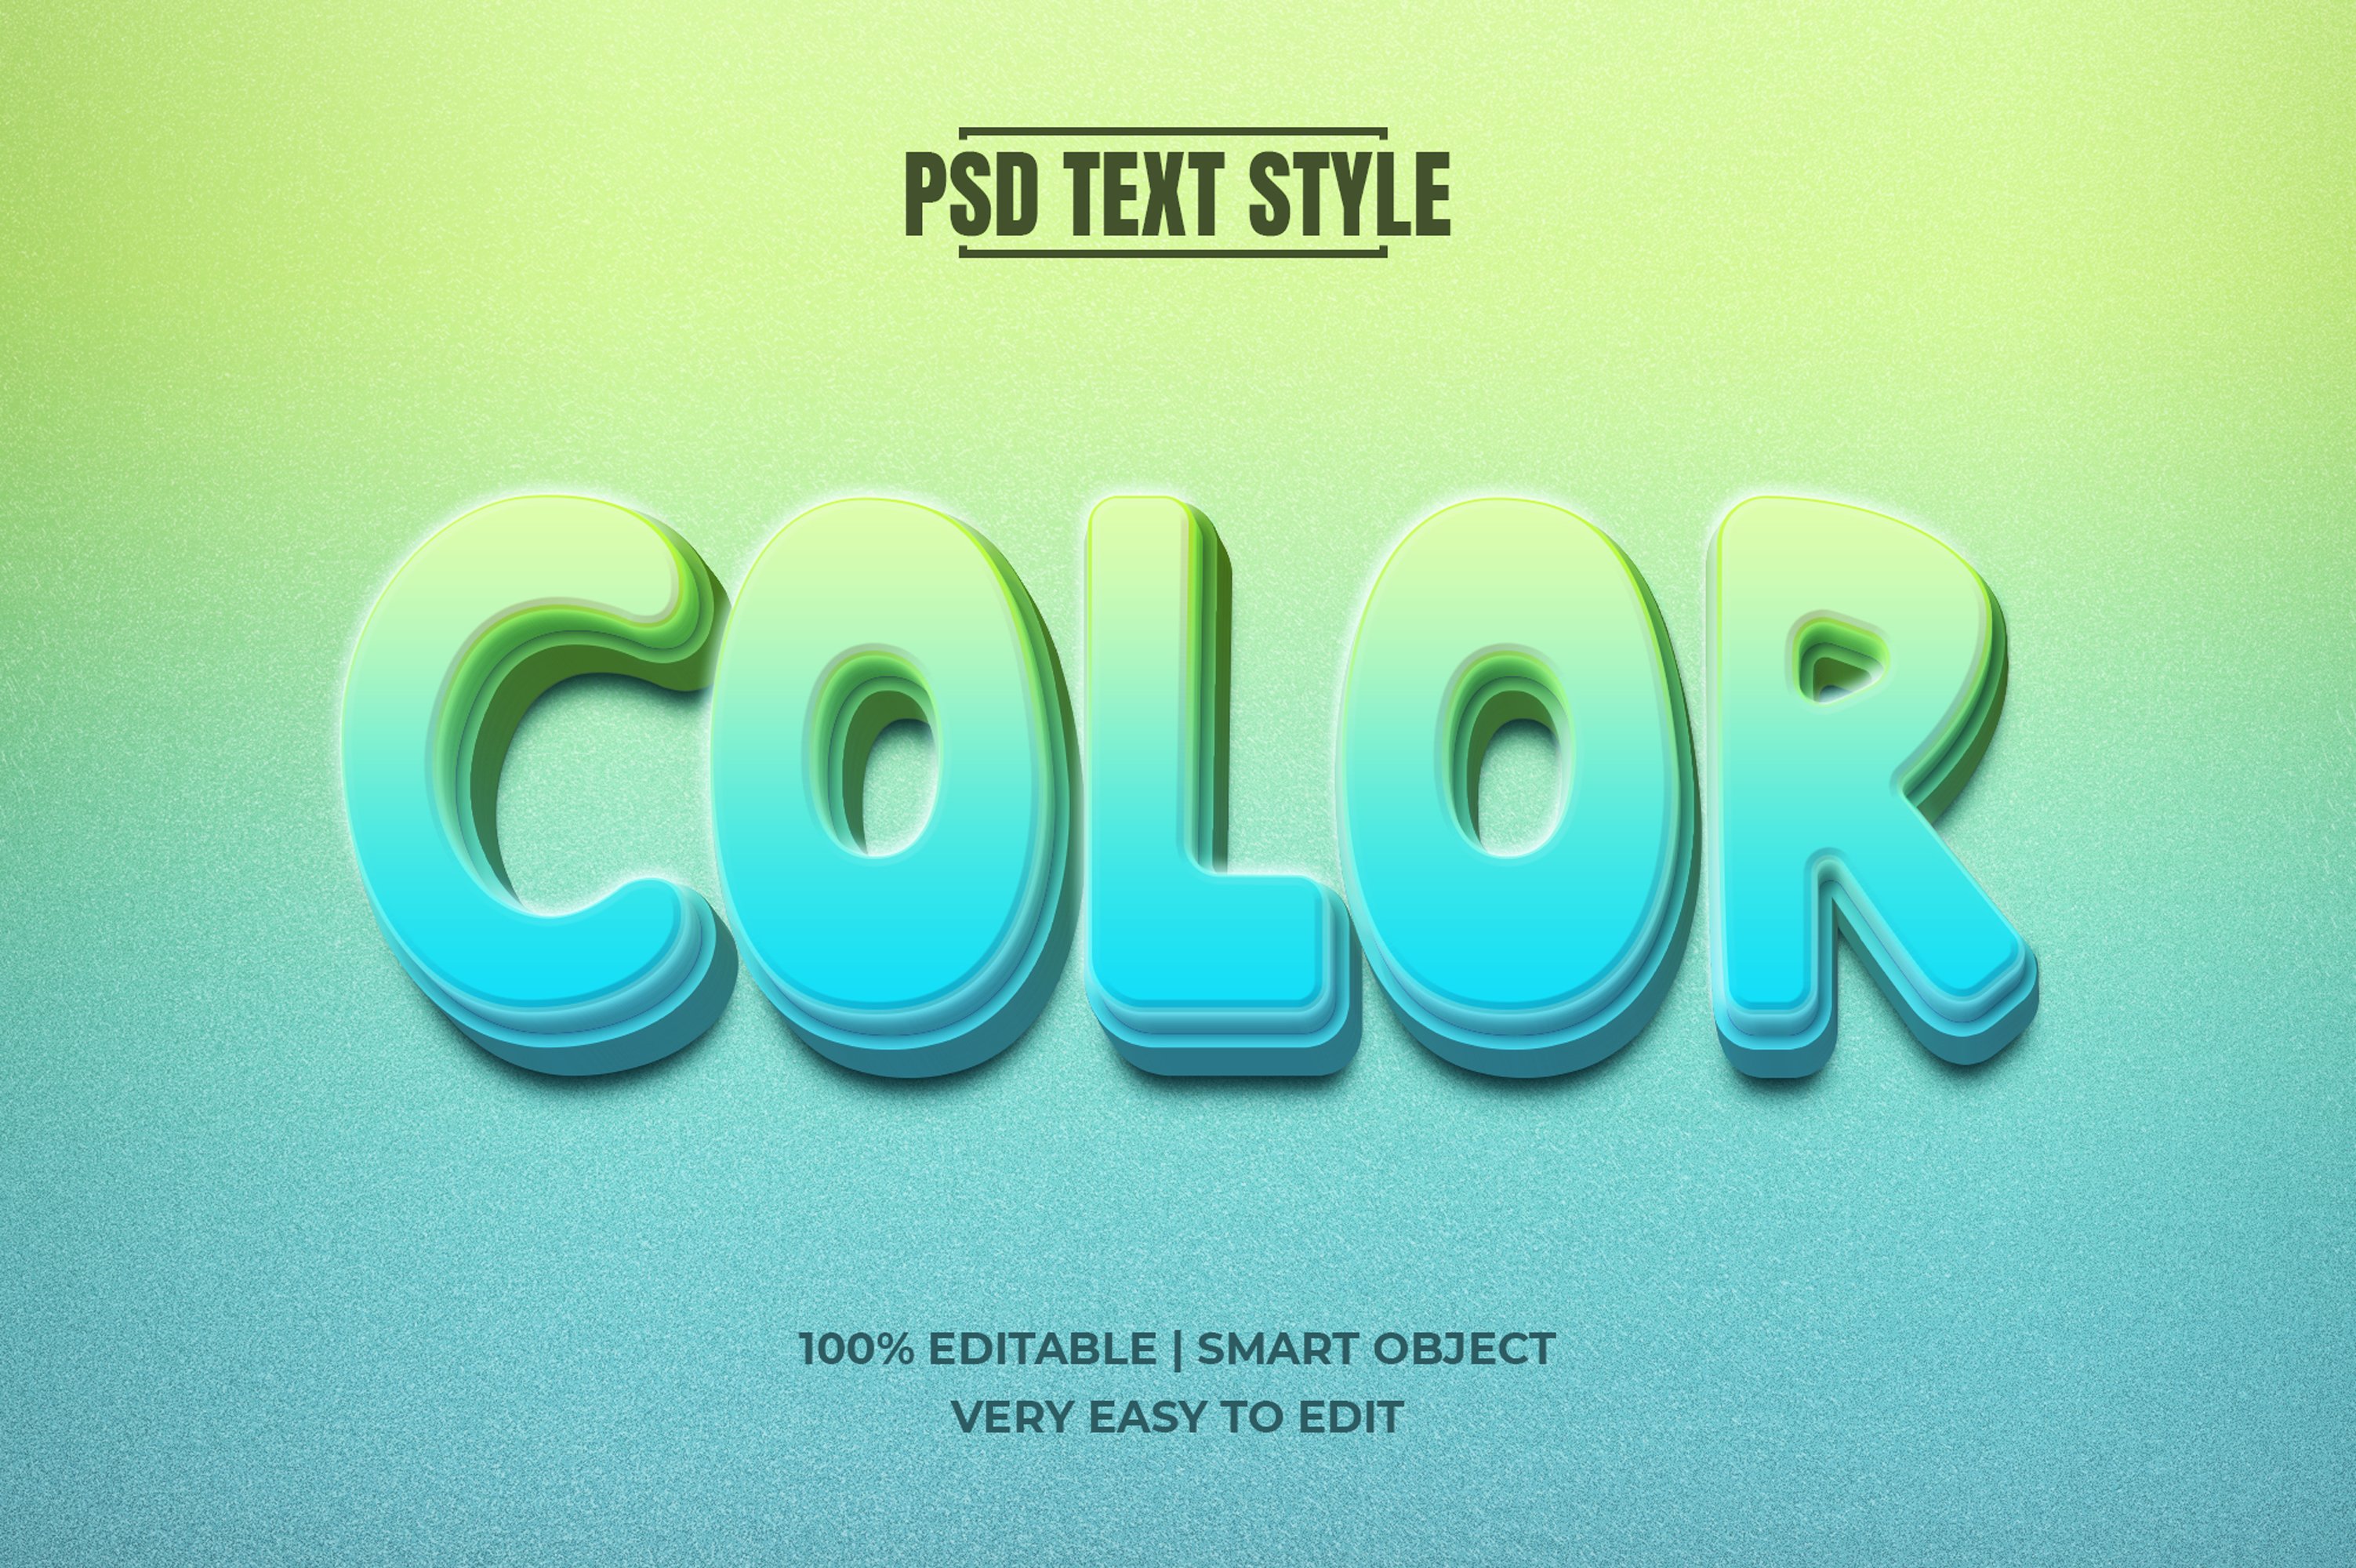 Colorful 3D Text Effect PSD Mockupcover image.